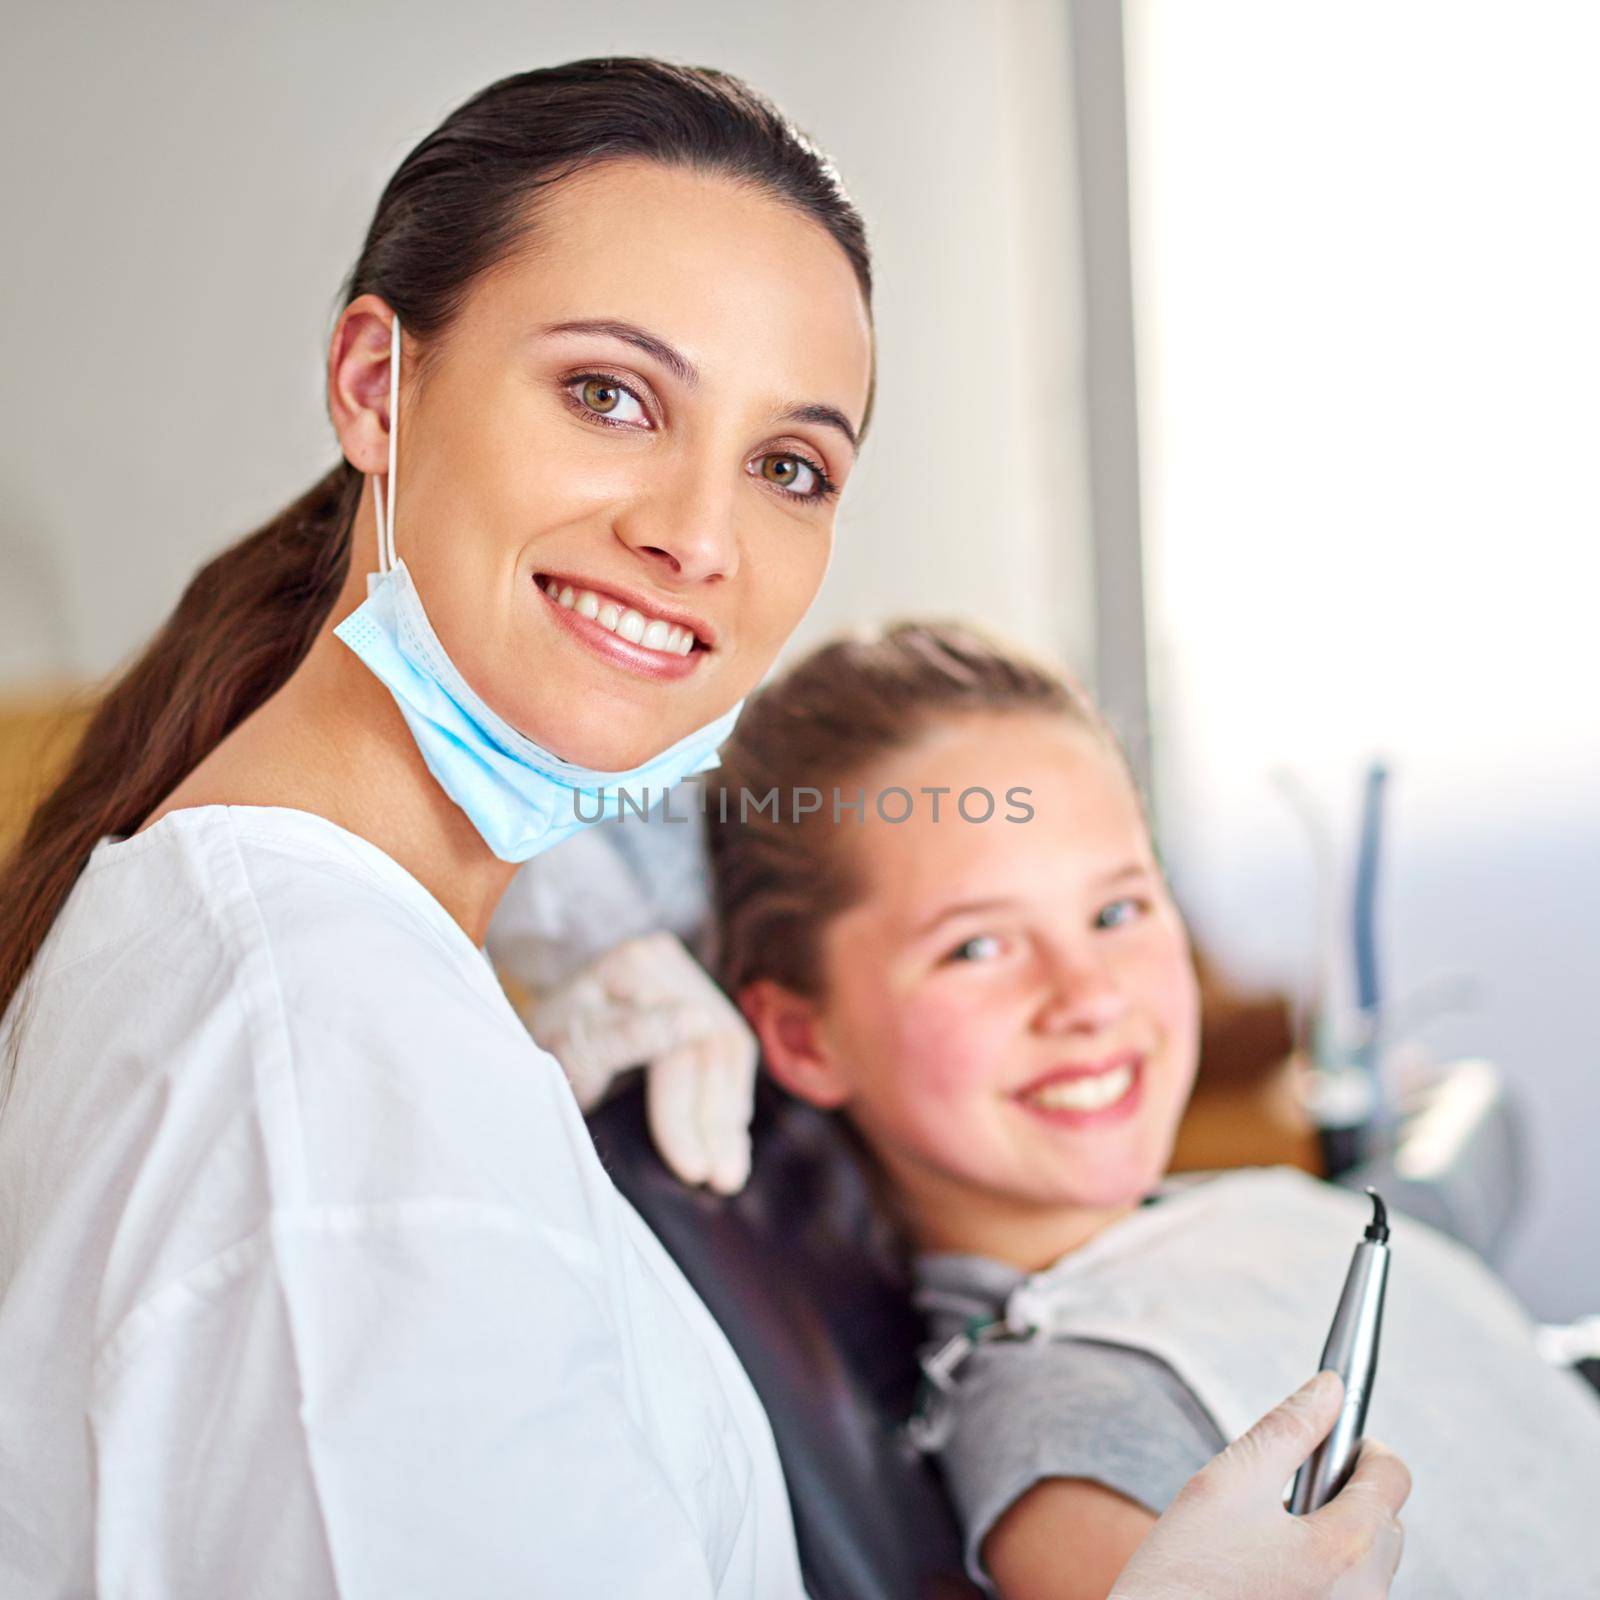 She takes good care of her young patients. Portrait of an attractive female dentist and her child patient. by YuriArcurs